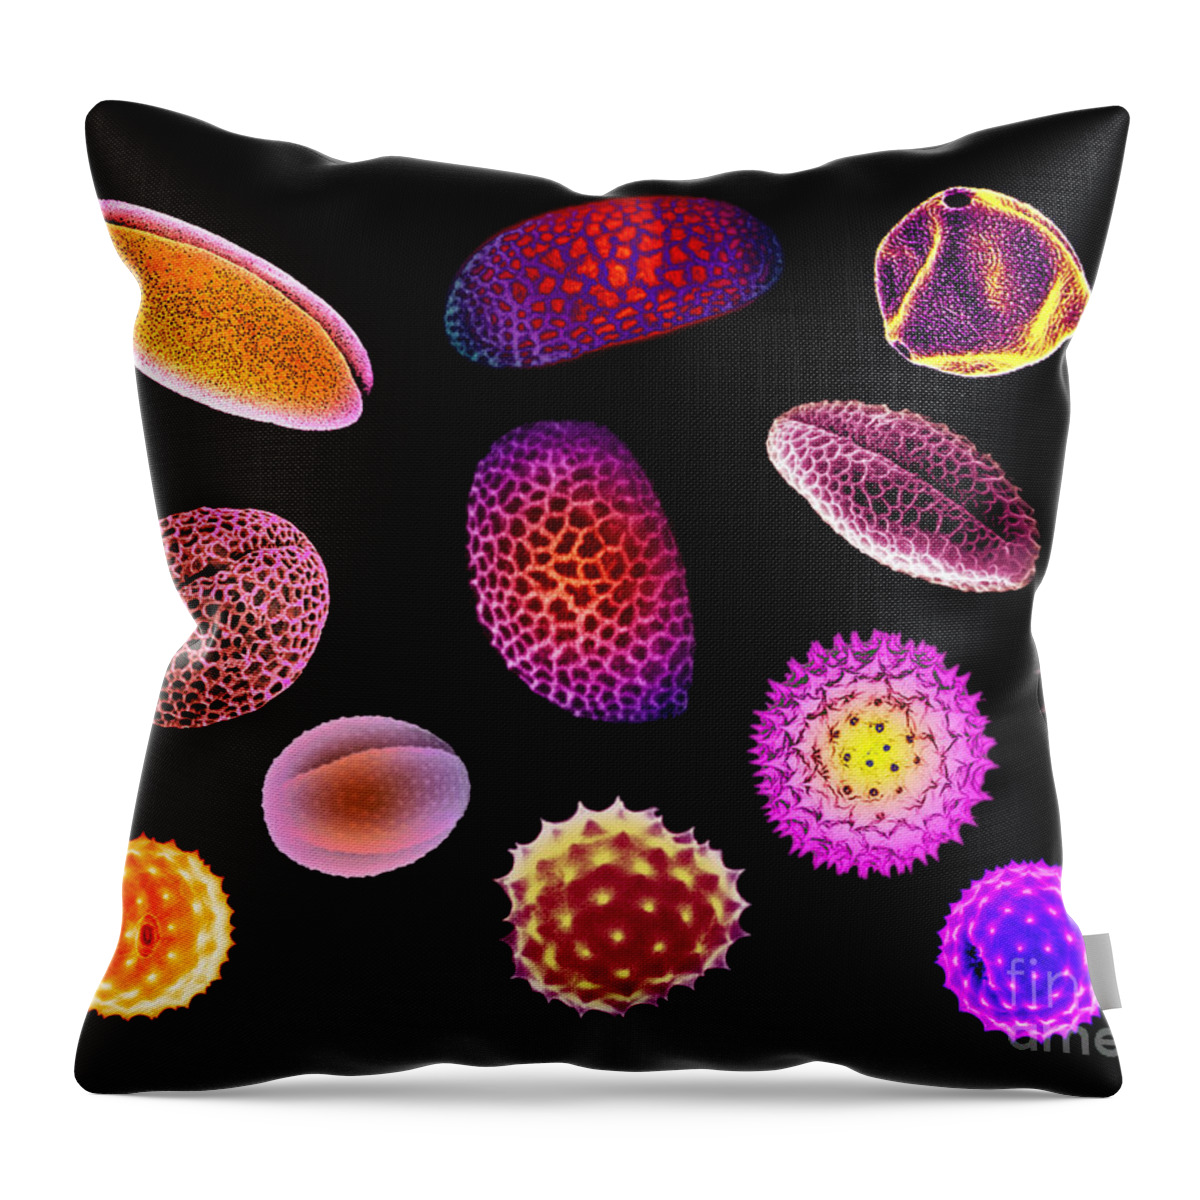 Daffodil Throw Pillow featuring the photograph Pollen Grains by Scott Camazine